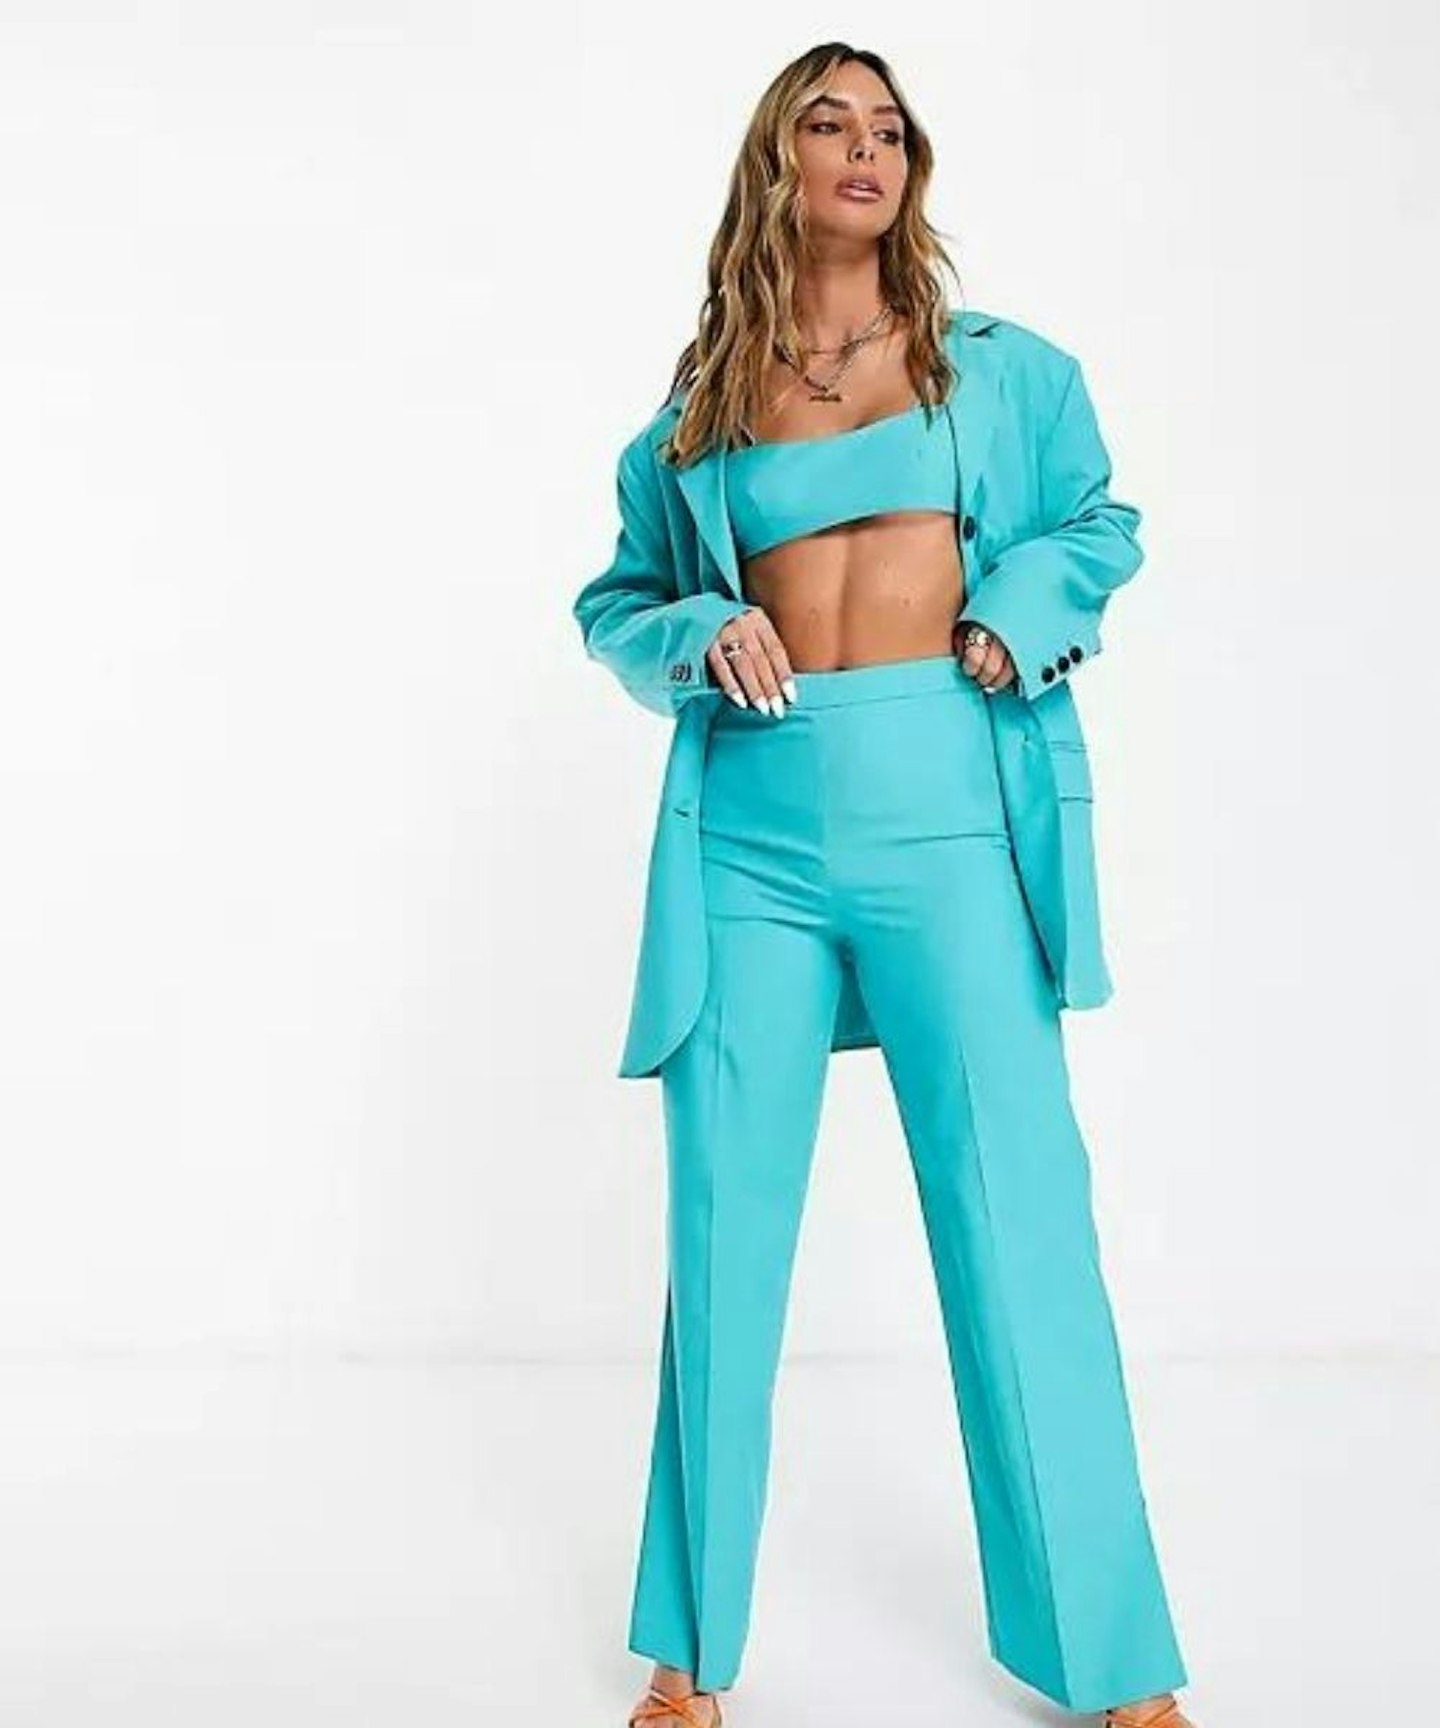 Topshop Suit Co-Ord In Turquoise, Oversized Blazer